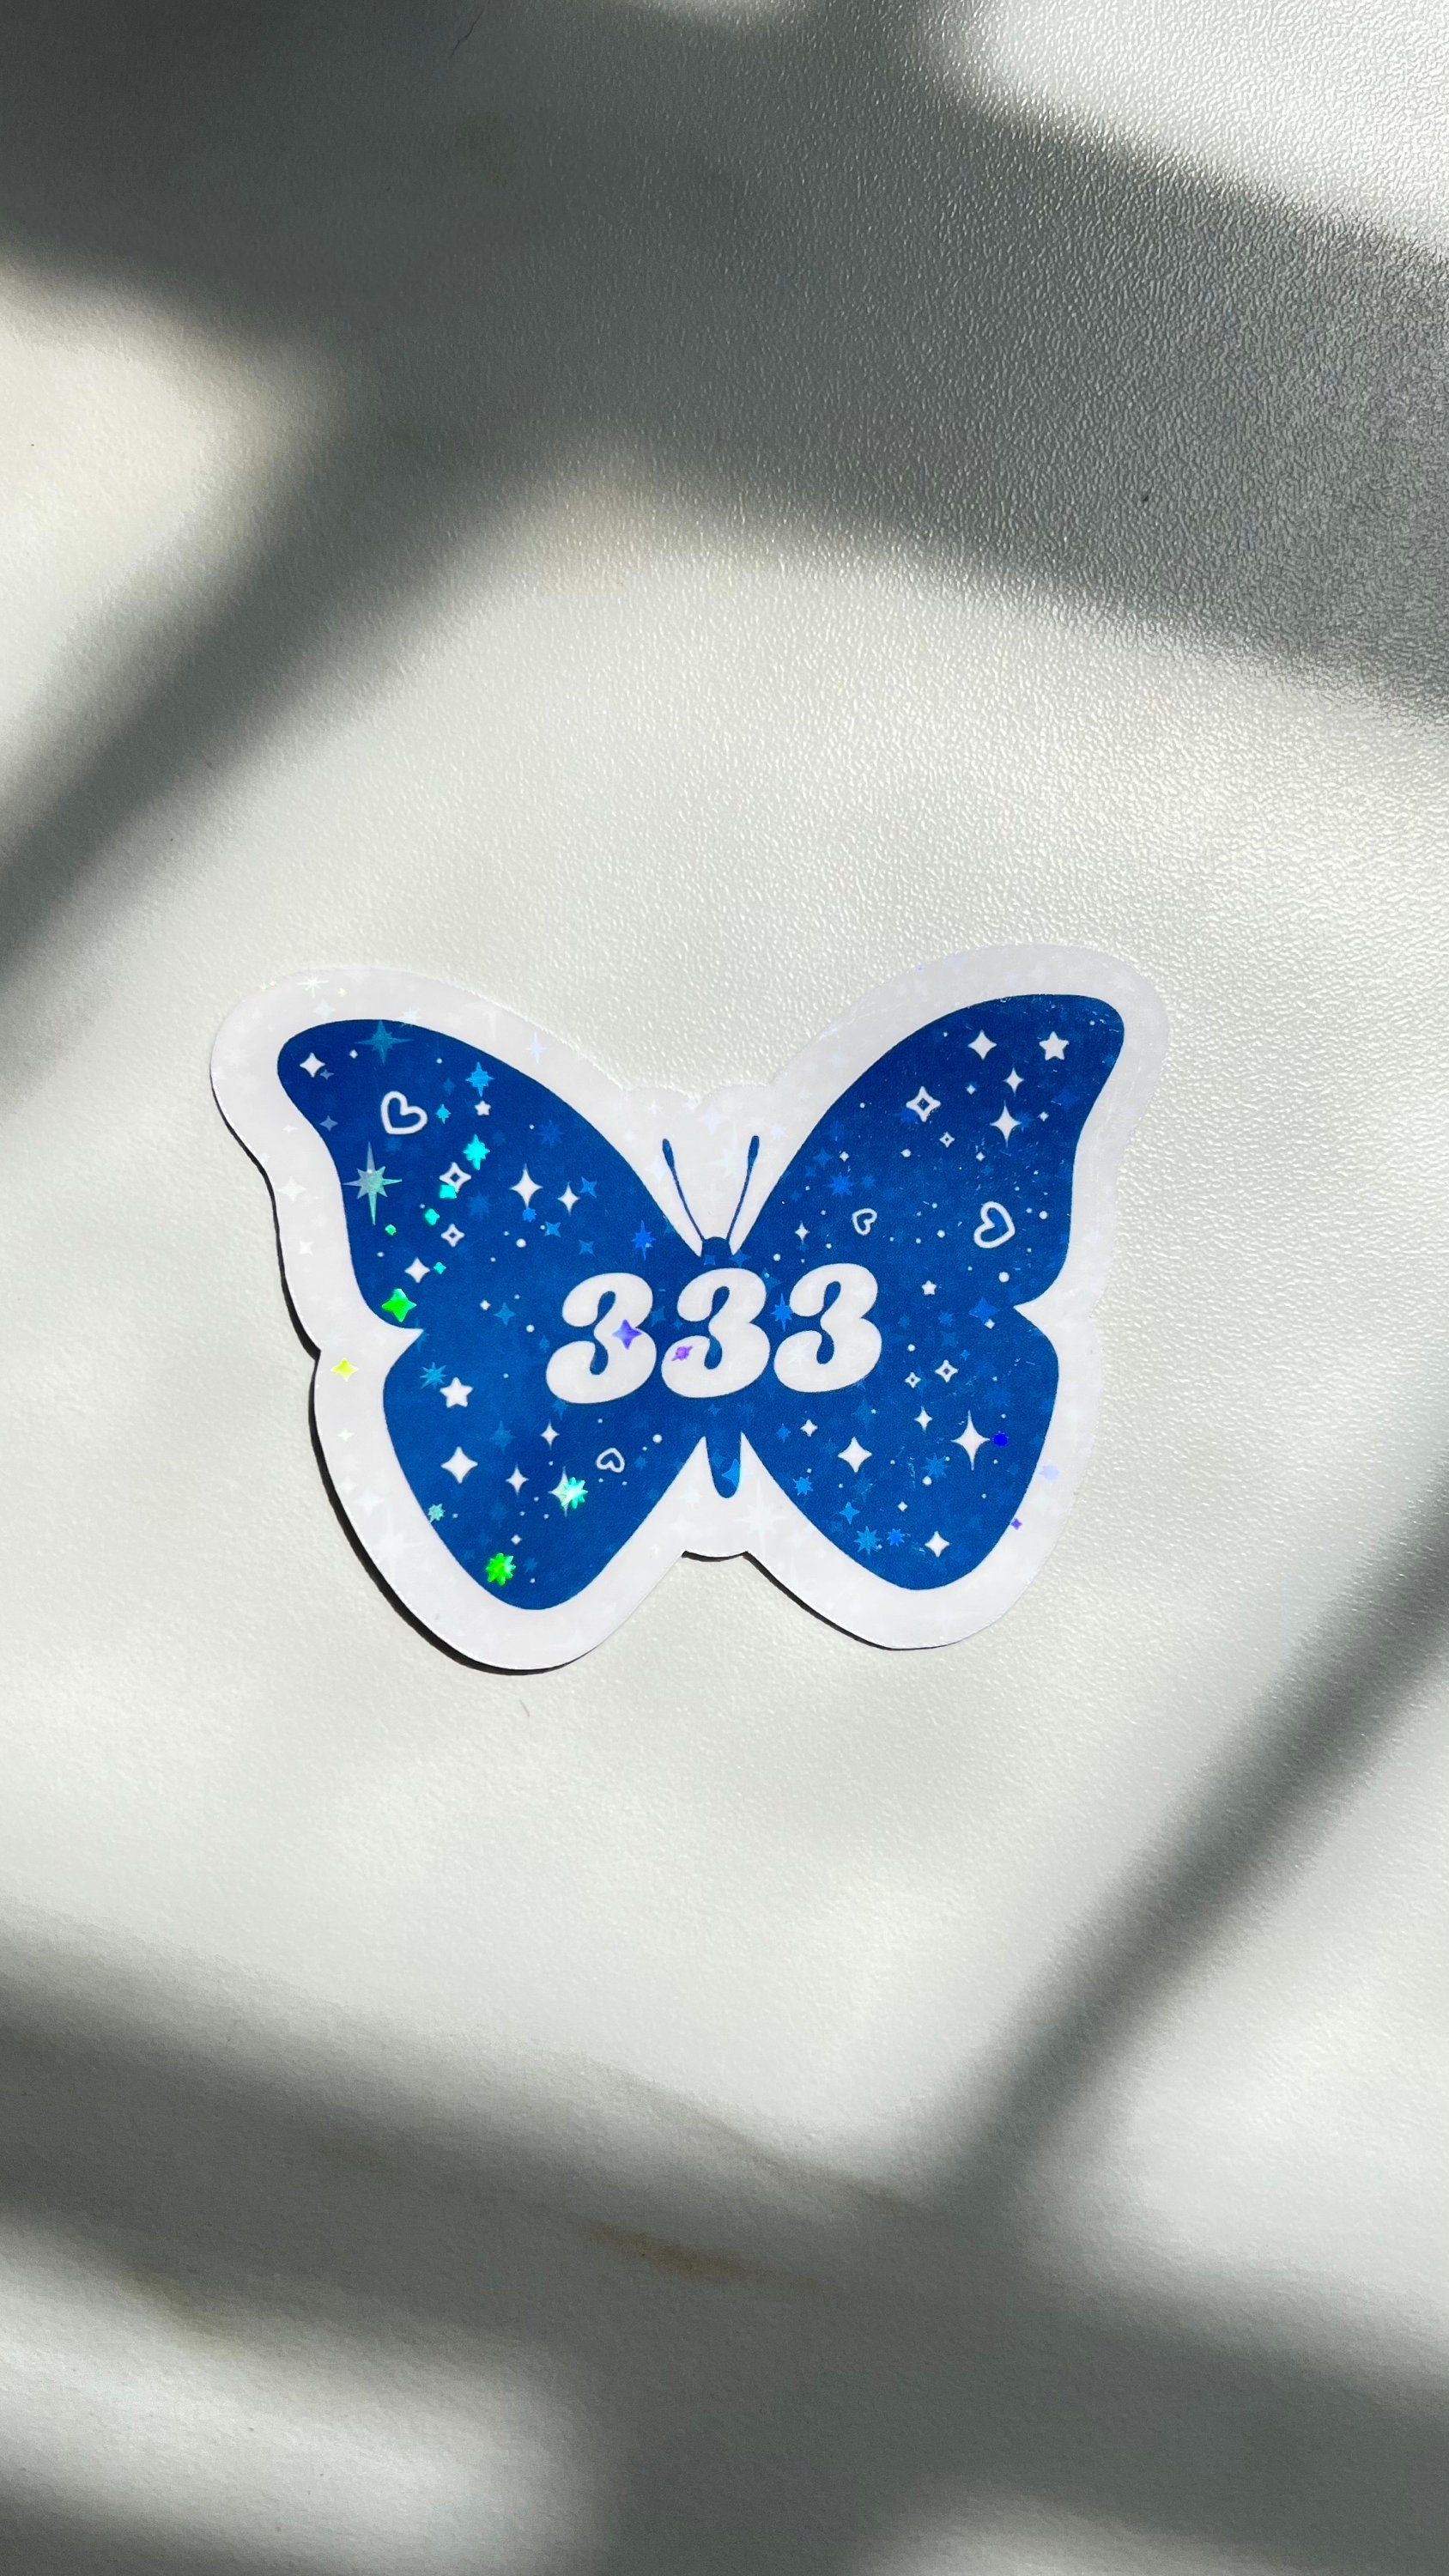 Angel Numbers Holographic Stickers Butterfly, Vinyl, Witchy Tarot Meaning, kindle stickers, laptop, die cut one piece sticker